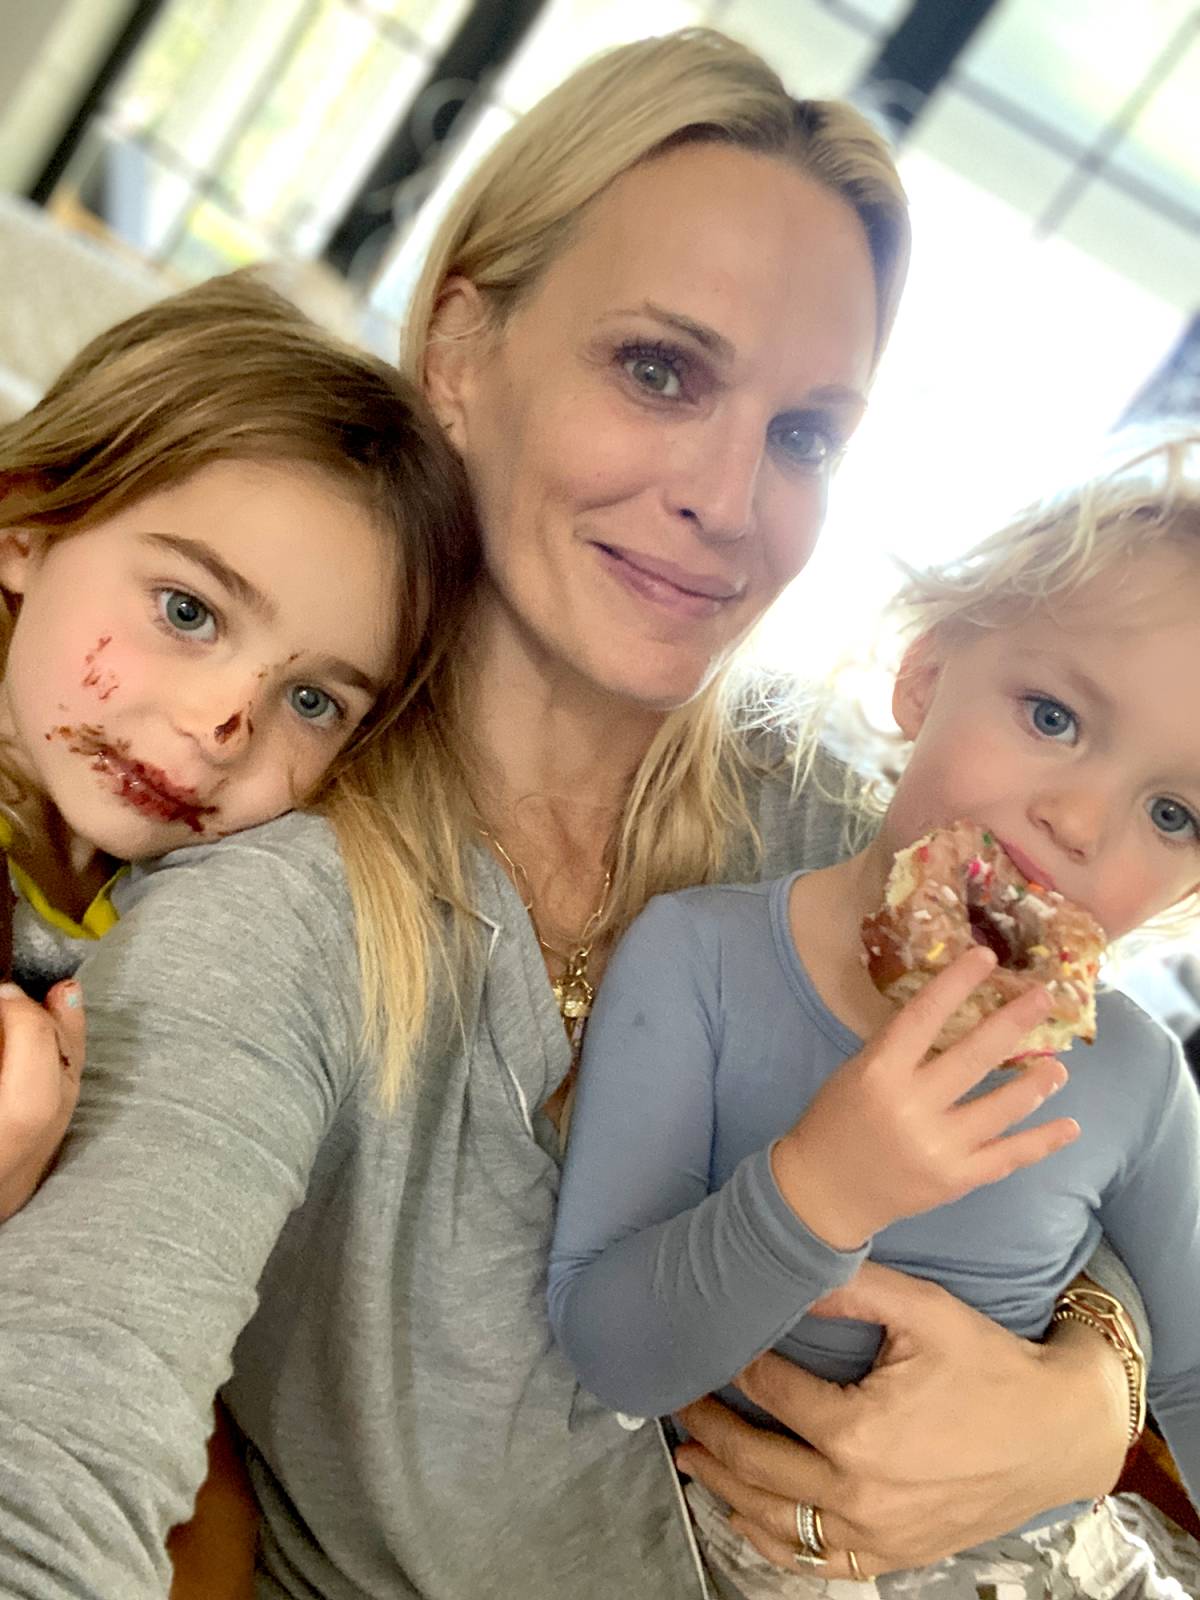 Watch: Molly Sims Shares the Hilarious Way She Influences Her Husband -  Sports Illustrated Lifestyle